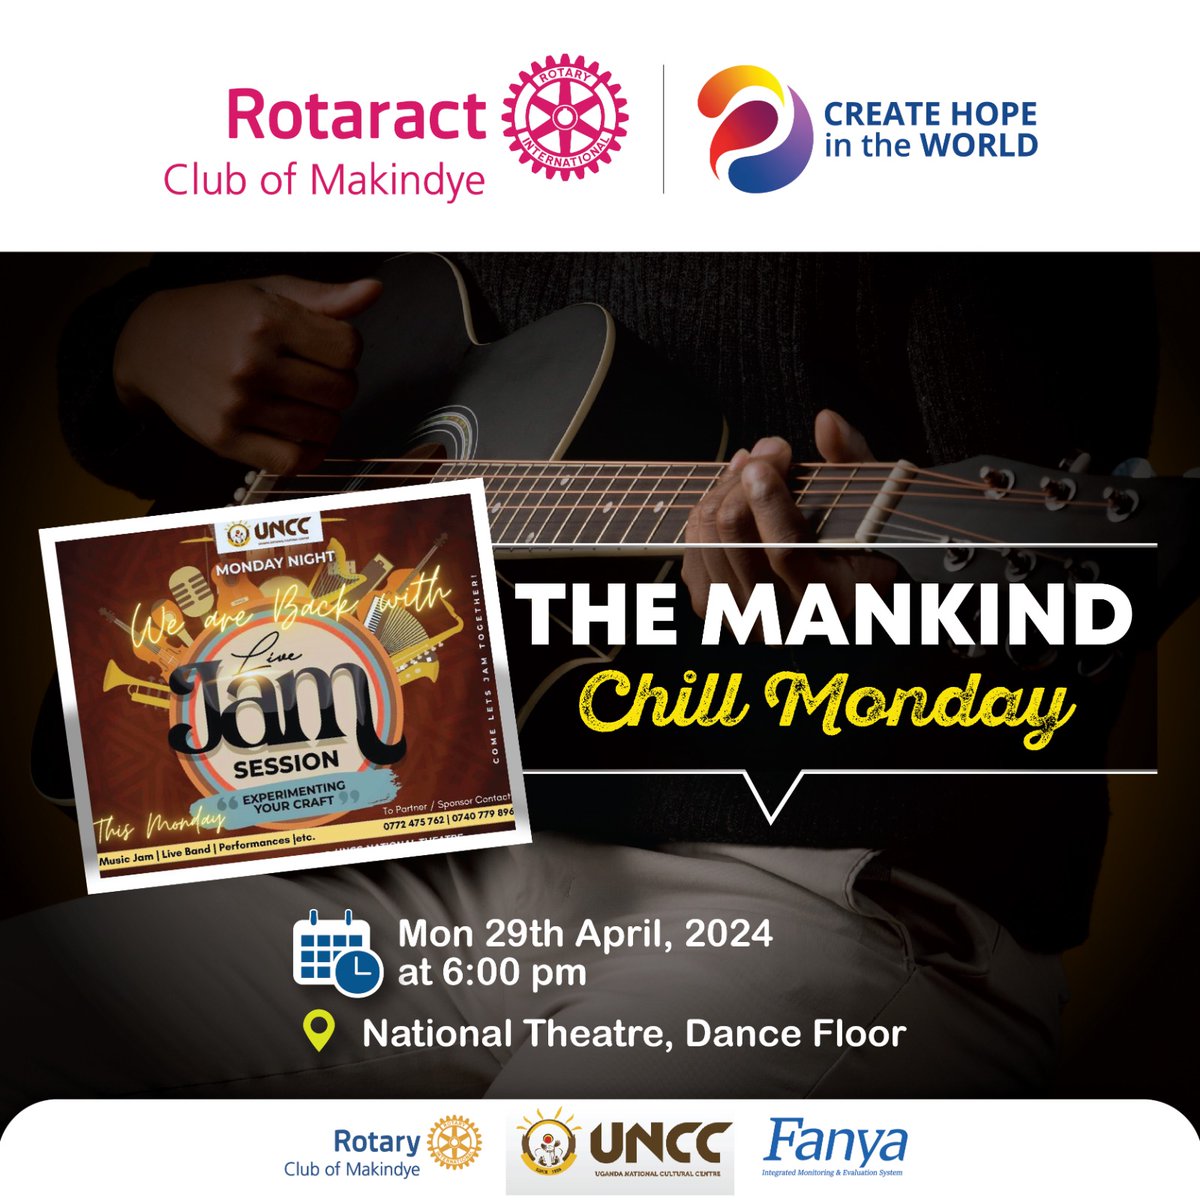 It's been a great April, *Thank you Lord*, and for today, let's go jamming... We join UNCC for the Jam Session today at national theatre at 6pm. Come let's roll together. #TheMankind #FlyBeyond